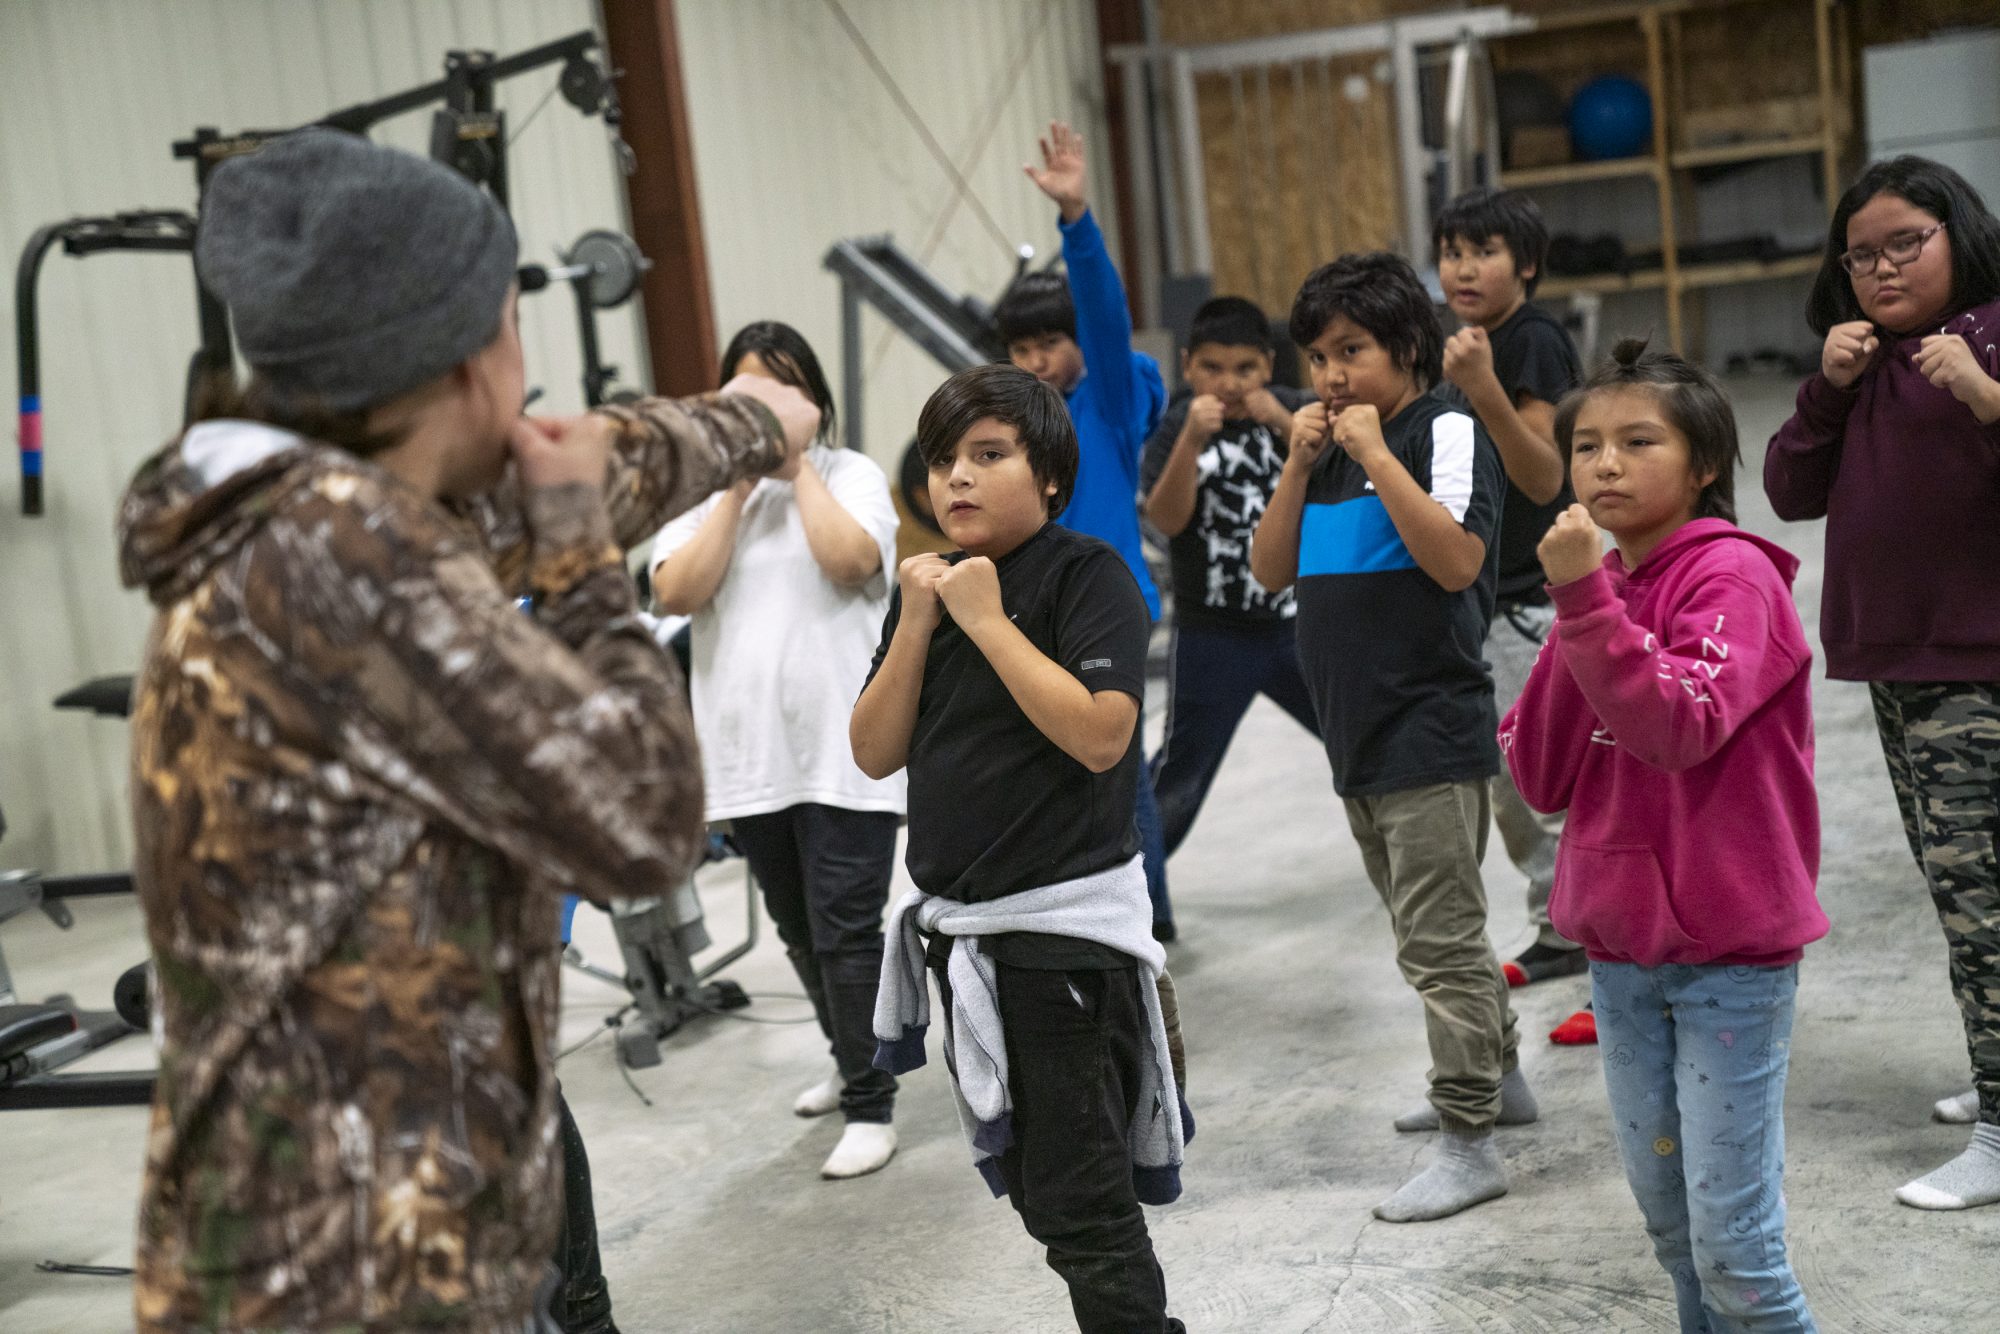 Mary Spencer coaches First Nations youth in boxing